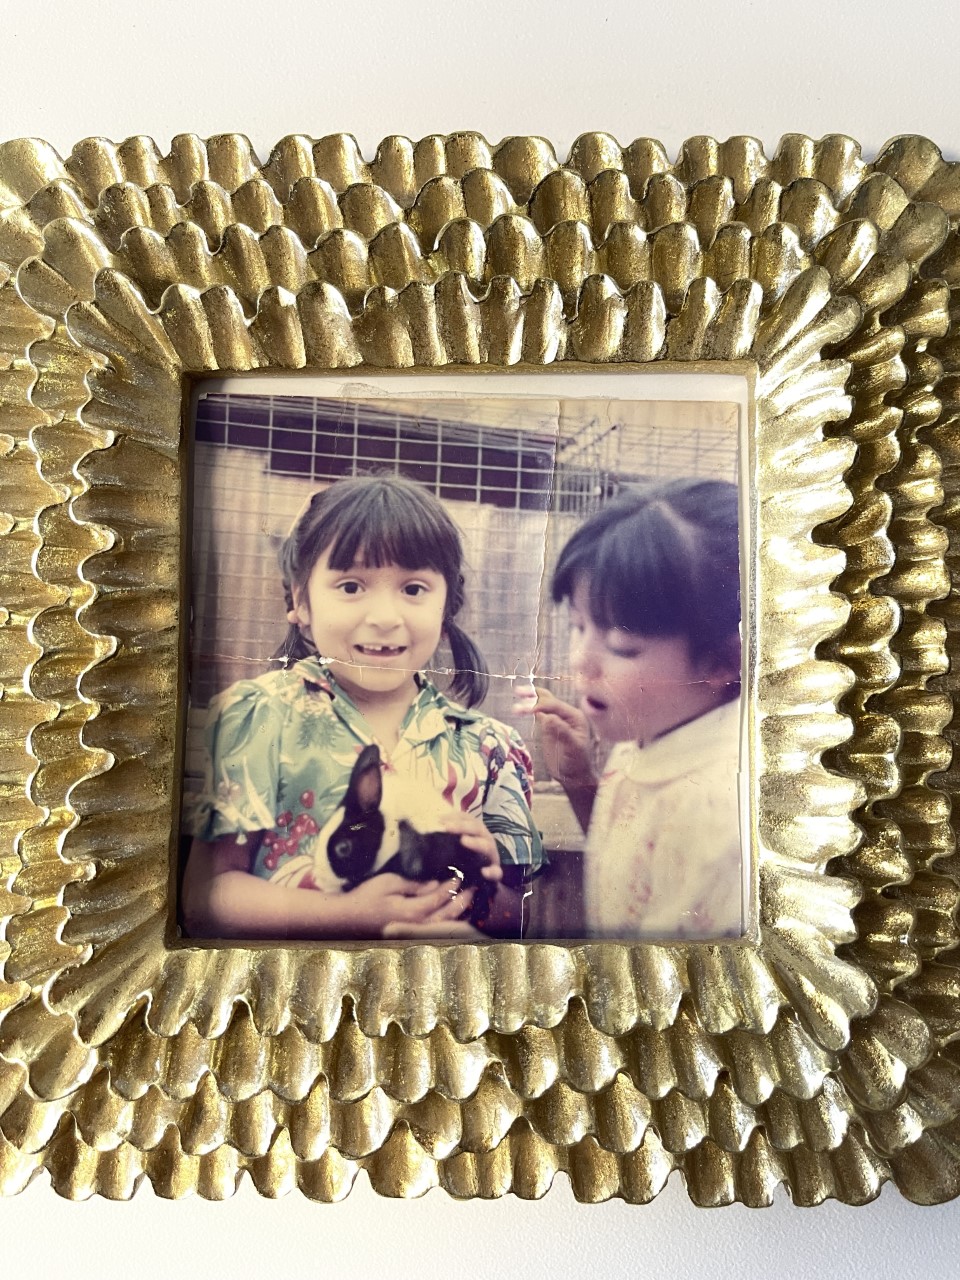 old family photo showing two girls holding and petting a rabbit